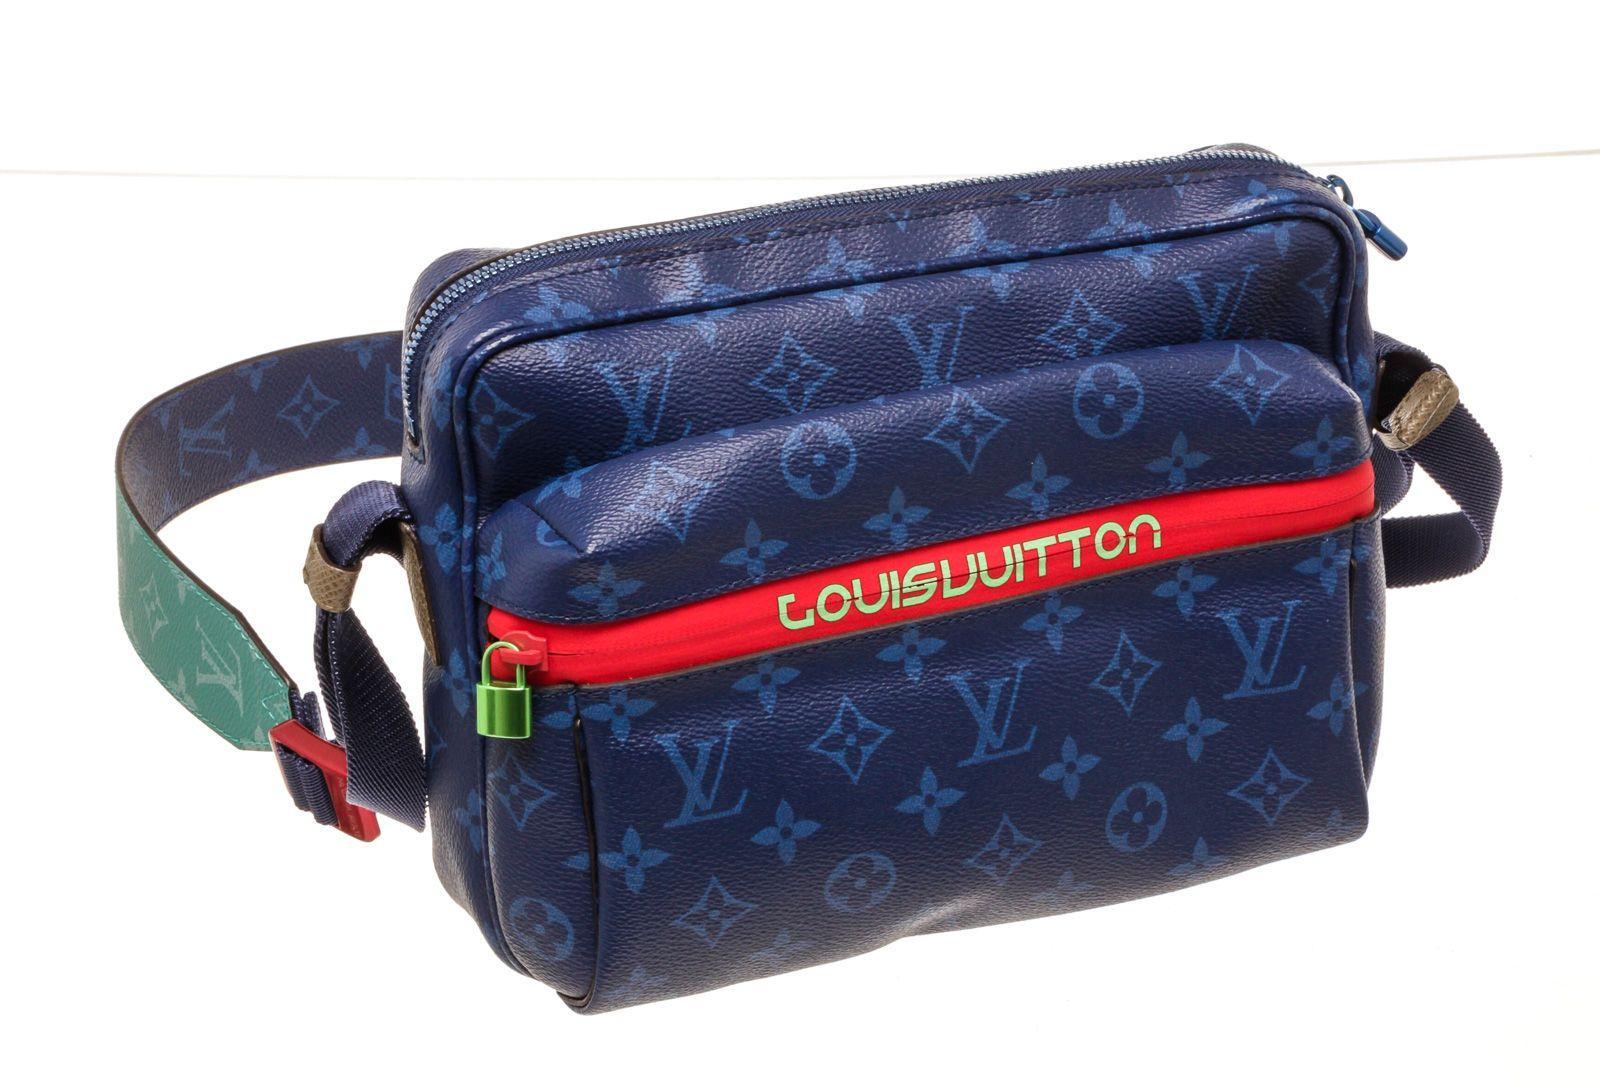 Louis Vuitton Outdoor Messenger Bag PM with blue hardware, adjustable strap In Good Condition For Sale In Irvine, CA